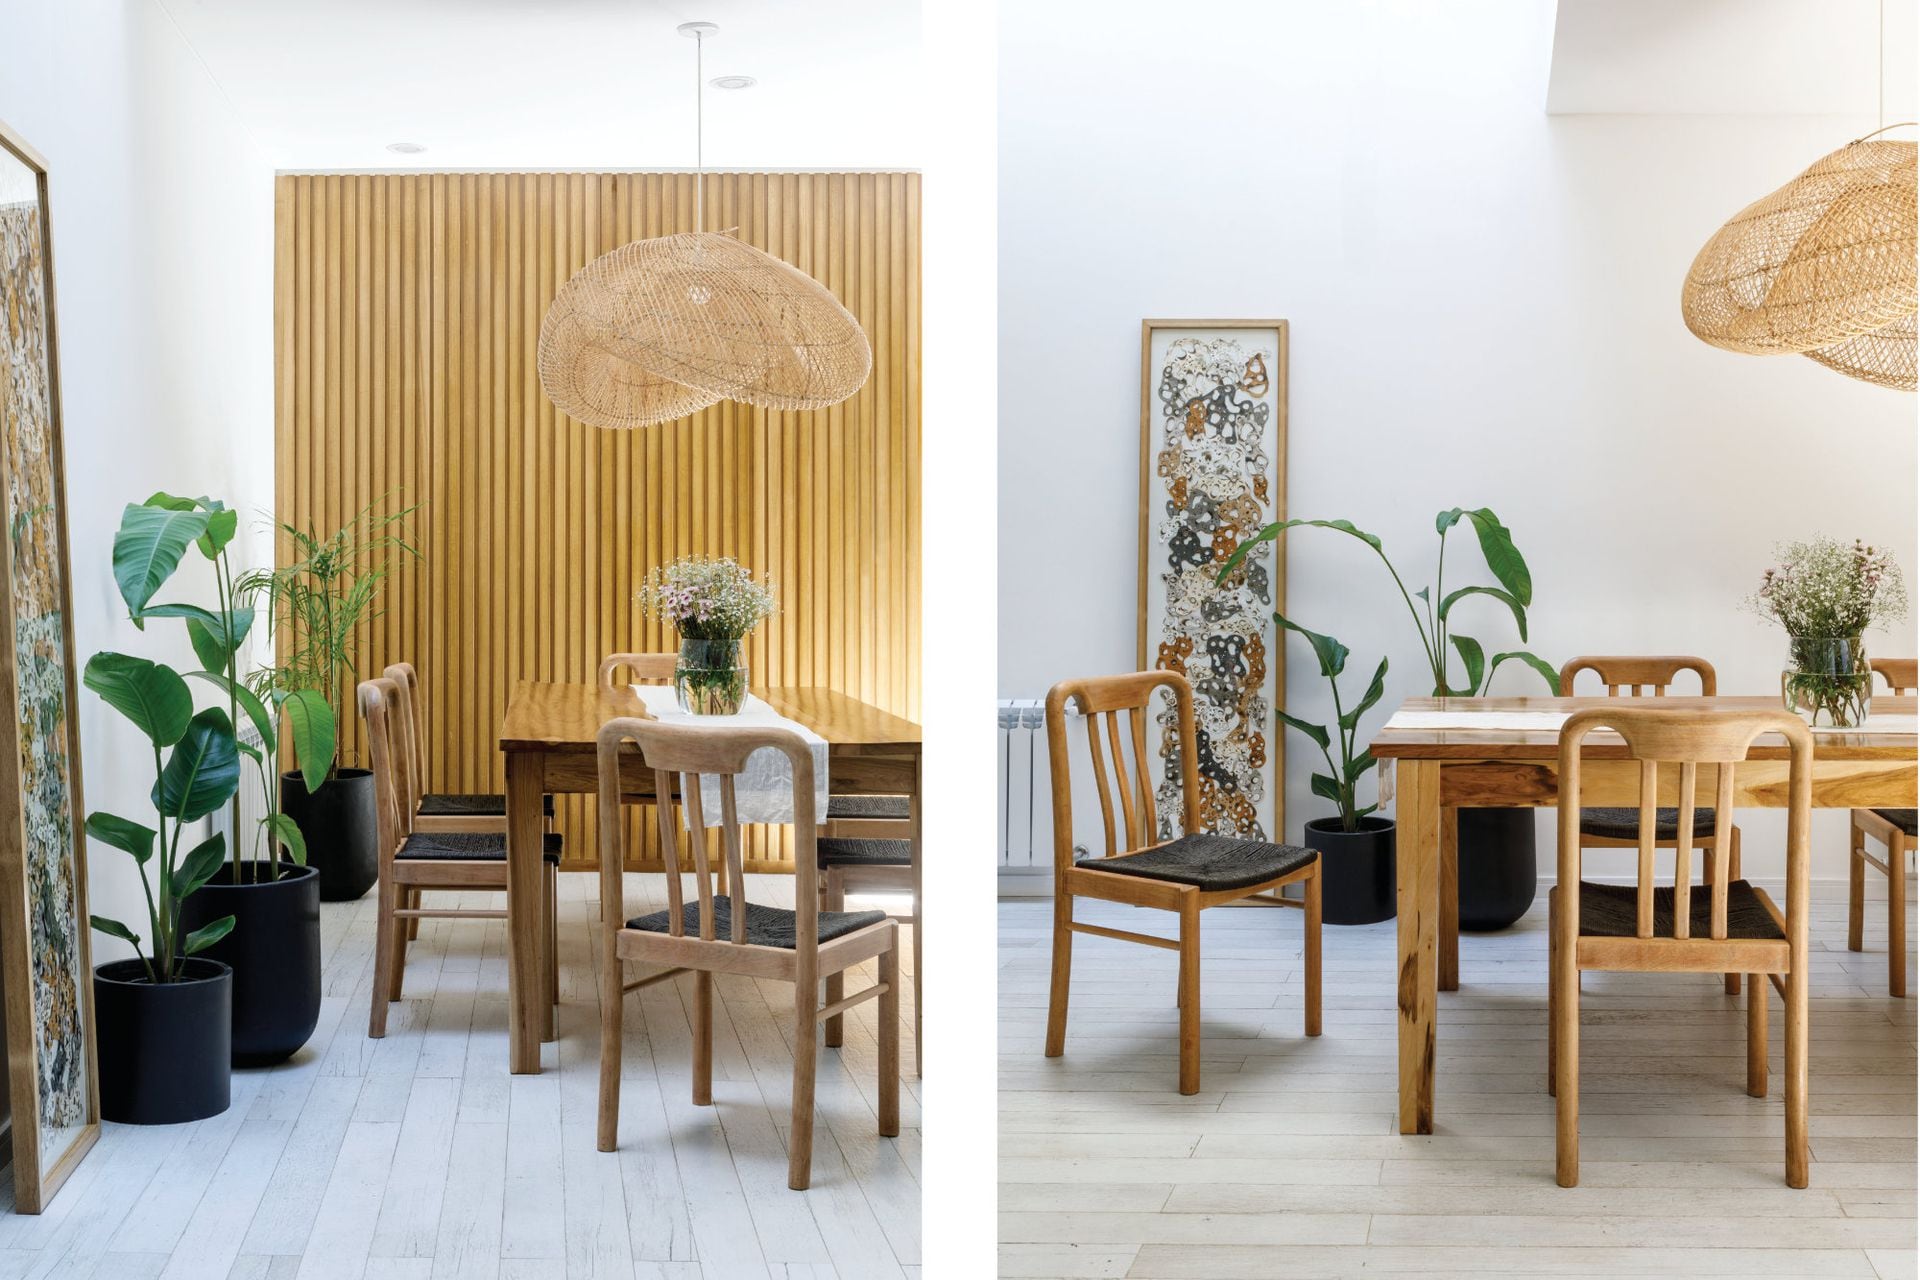 Pendant lamp made of natural fibers (Compañía Nativa).  Custom petiribí table (Lark Decoration).  Road (Gion).  Inherited chairs, restored and upholstered with black kraft thread (Lavando Madera).  Work in paper cut by Inés Tassano.  Wood cladding (Imdo Moldings).  Plants and pots (Nature City).